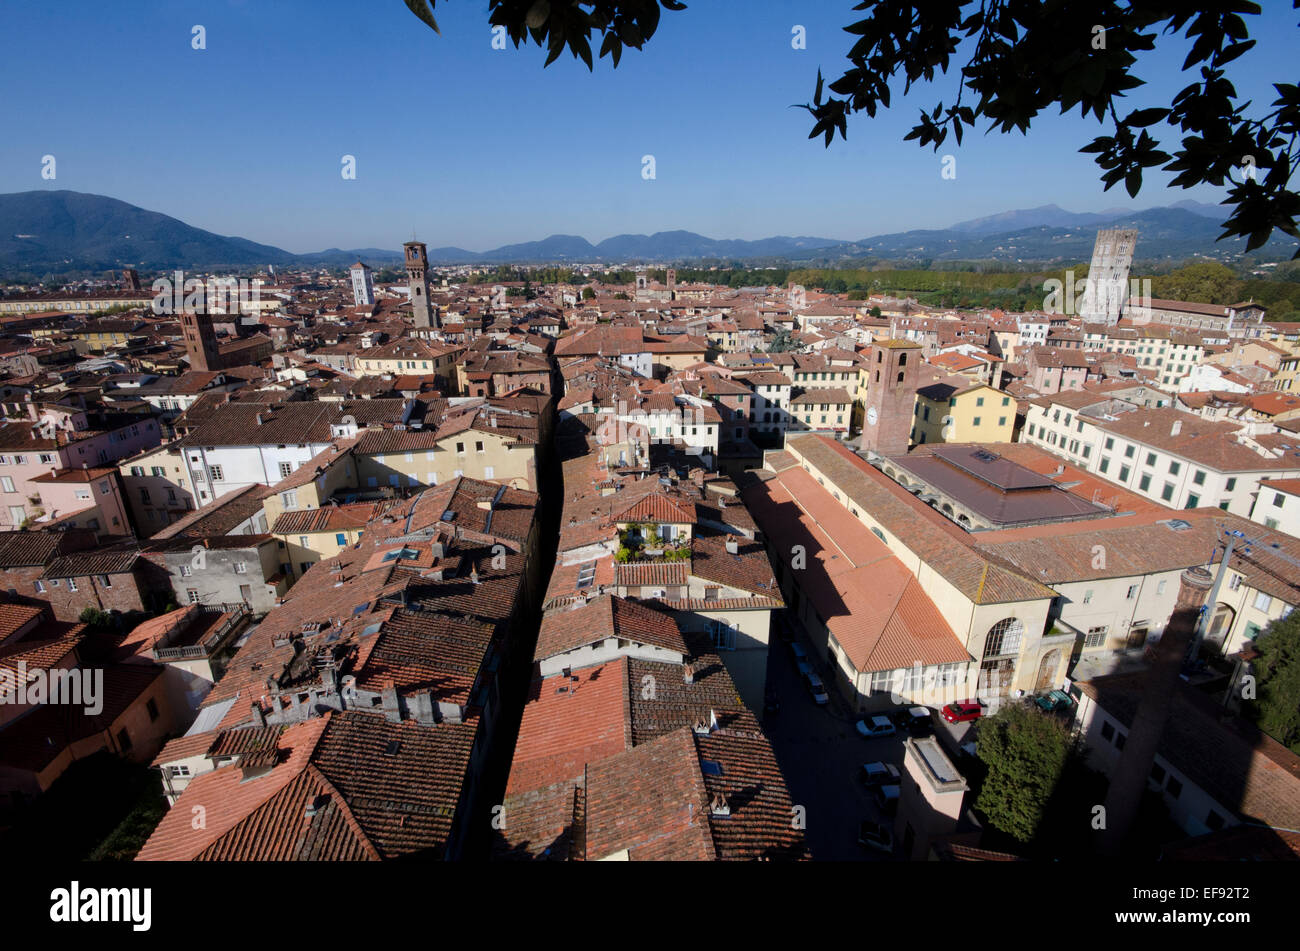 View from the top of the Guinigi tower in Lucca, Tuscany, Italy Stock Photo